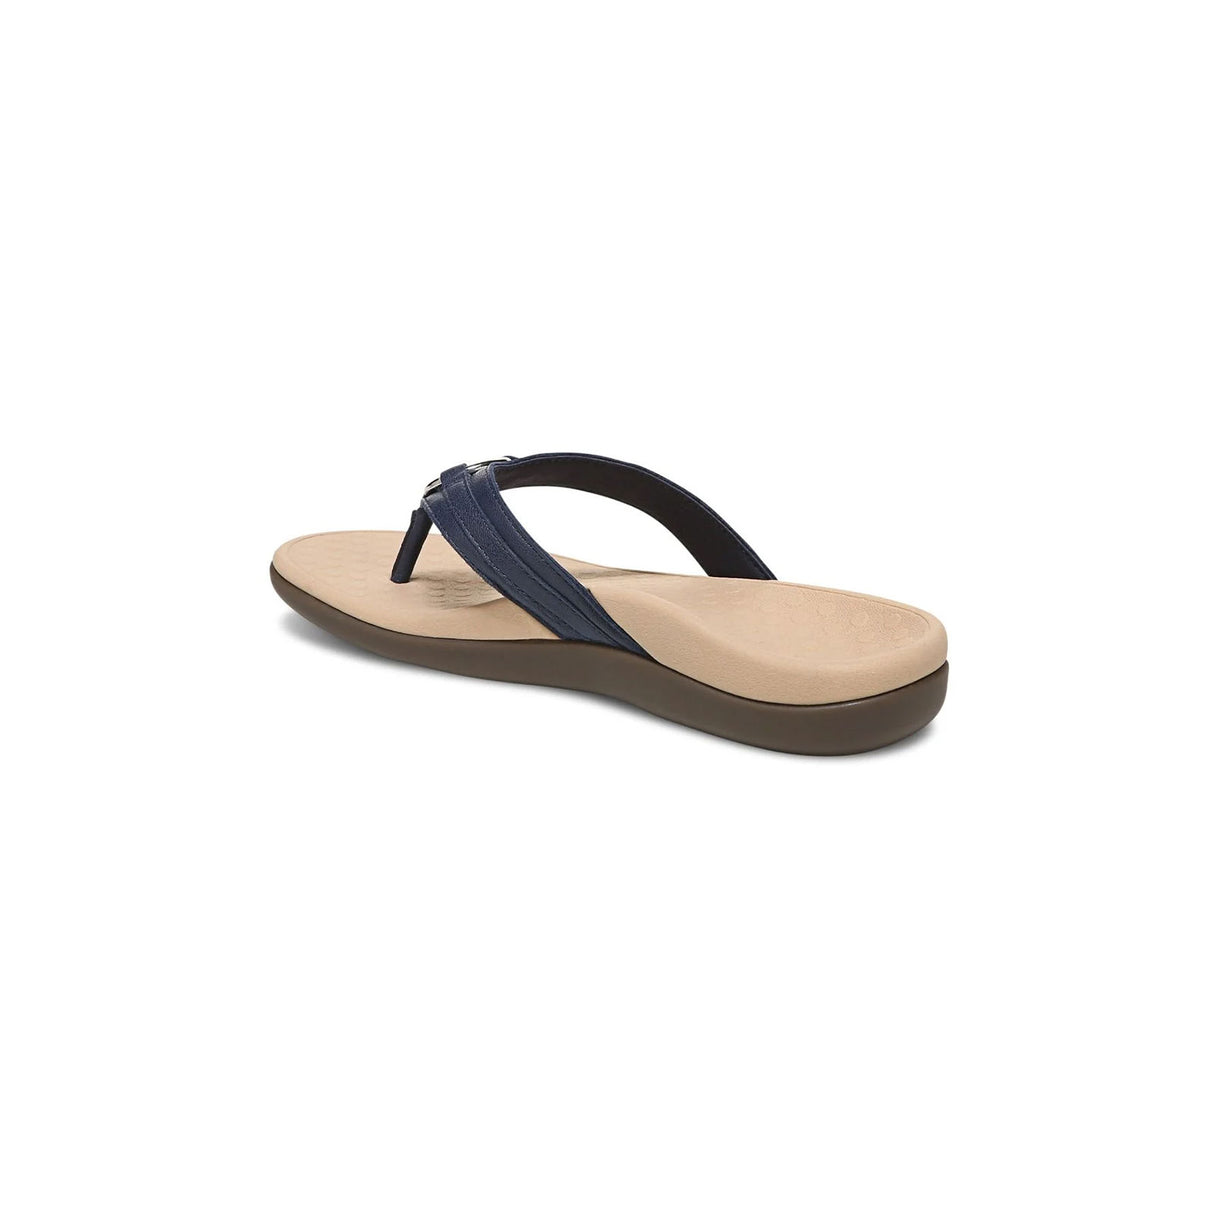 Vionic Aloe Thong Sandal (Women) - Navy Leather Sandals - Thong - The Heel Shoe Fitters